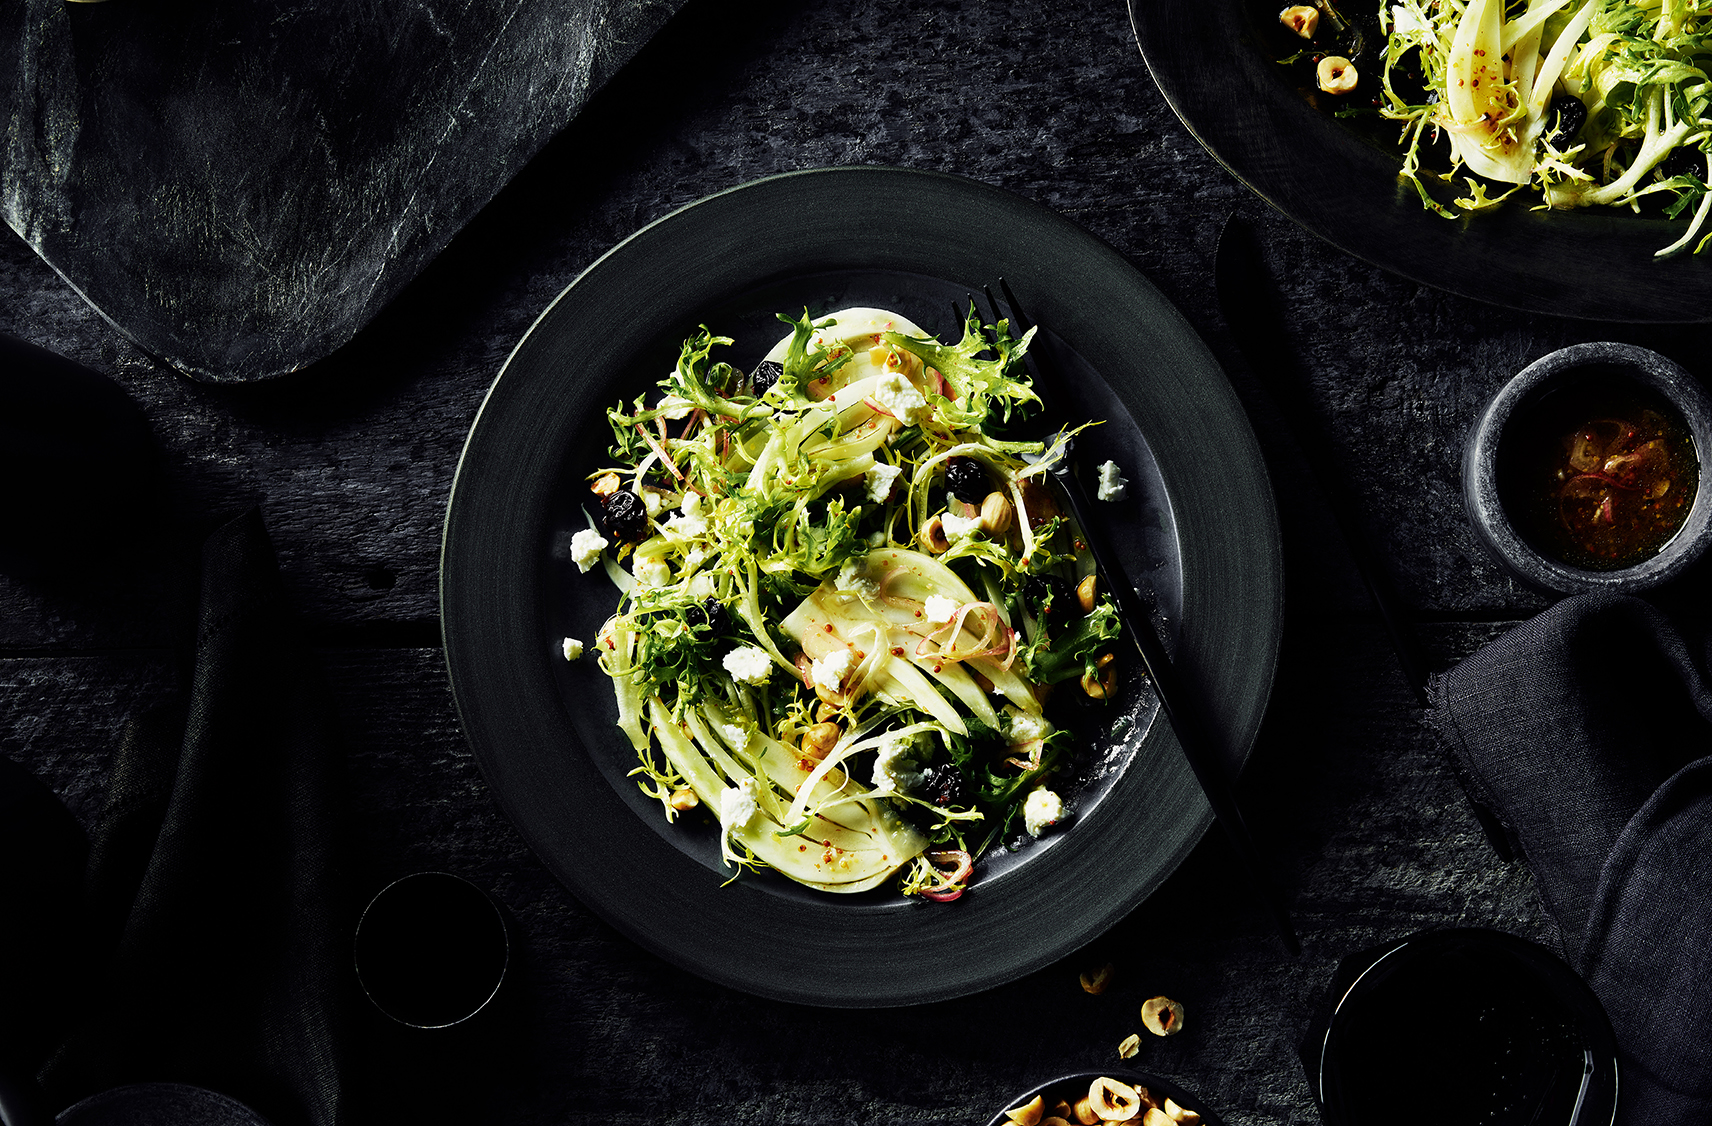 fennel hazelnut salad drizzled with white peach dressing.  all served on a black salad plate